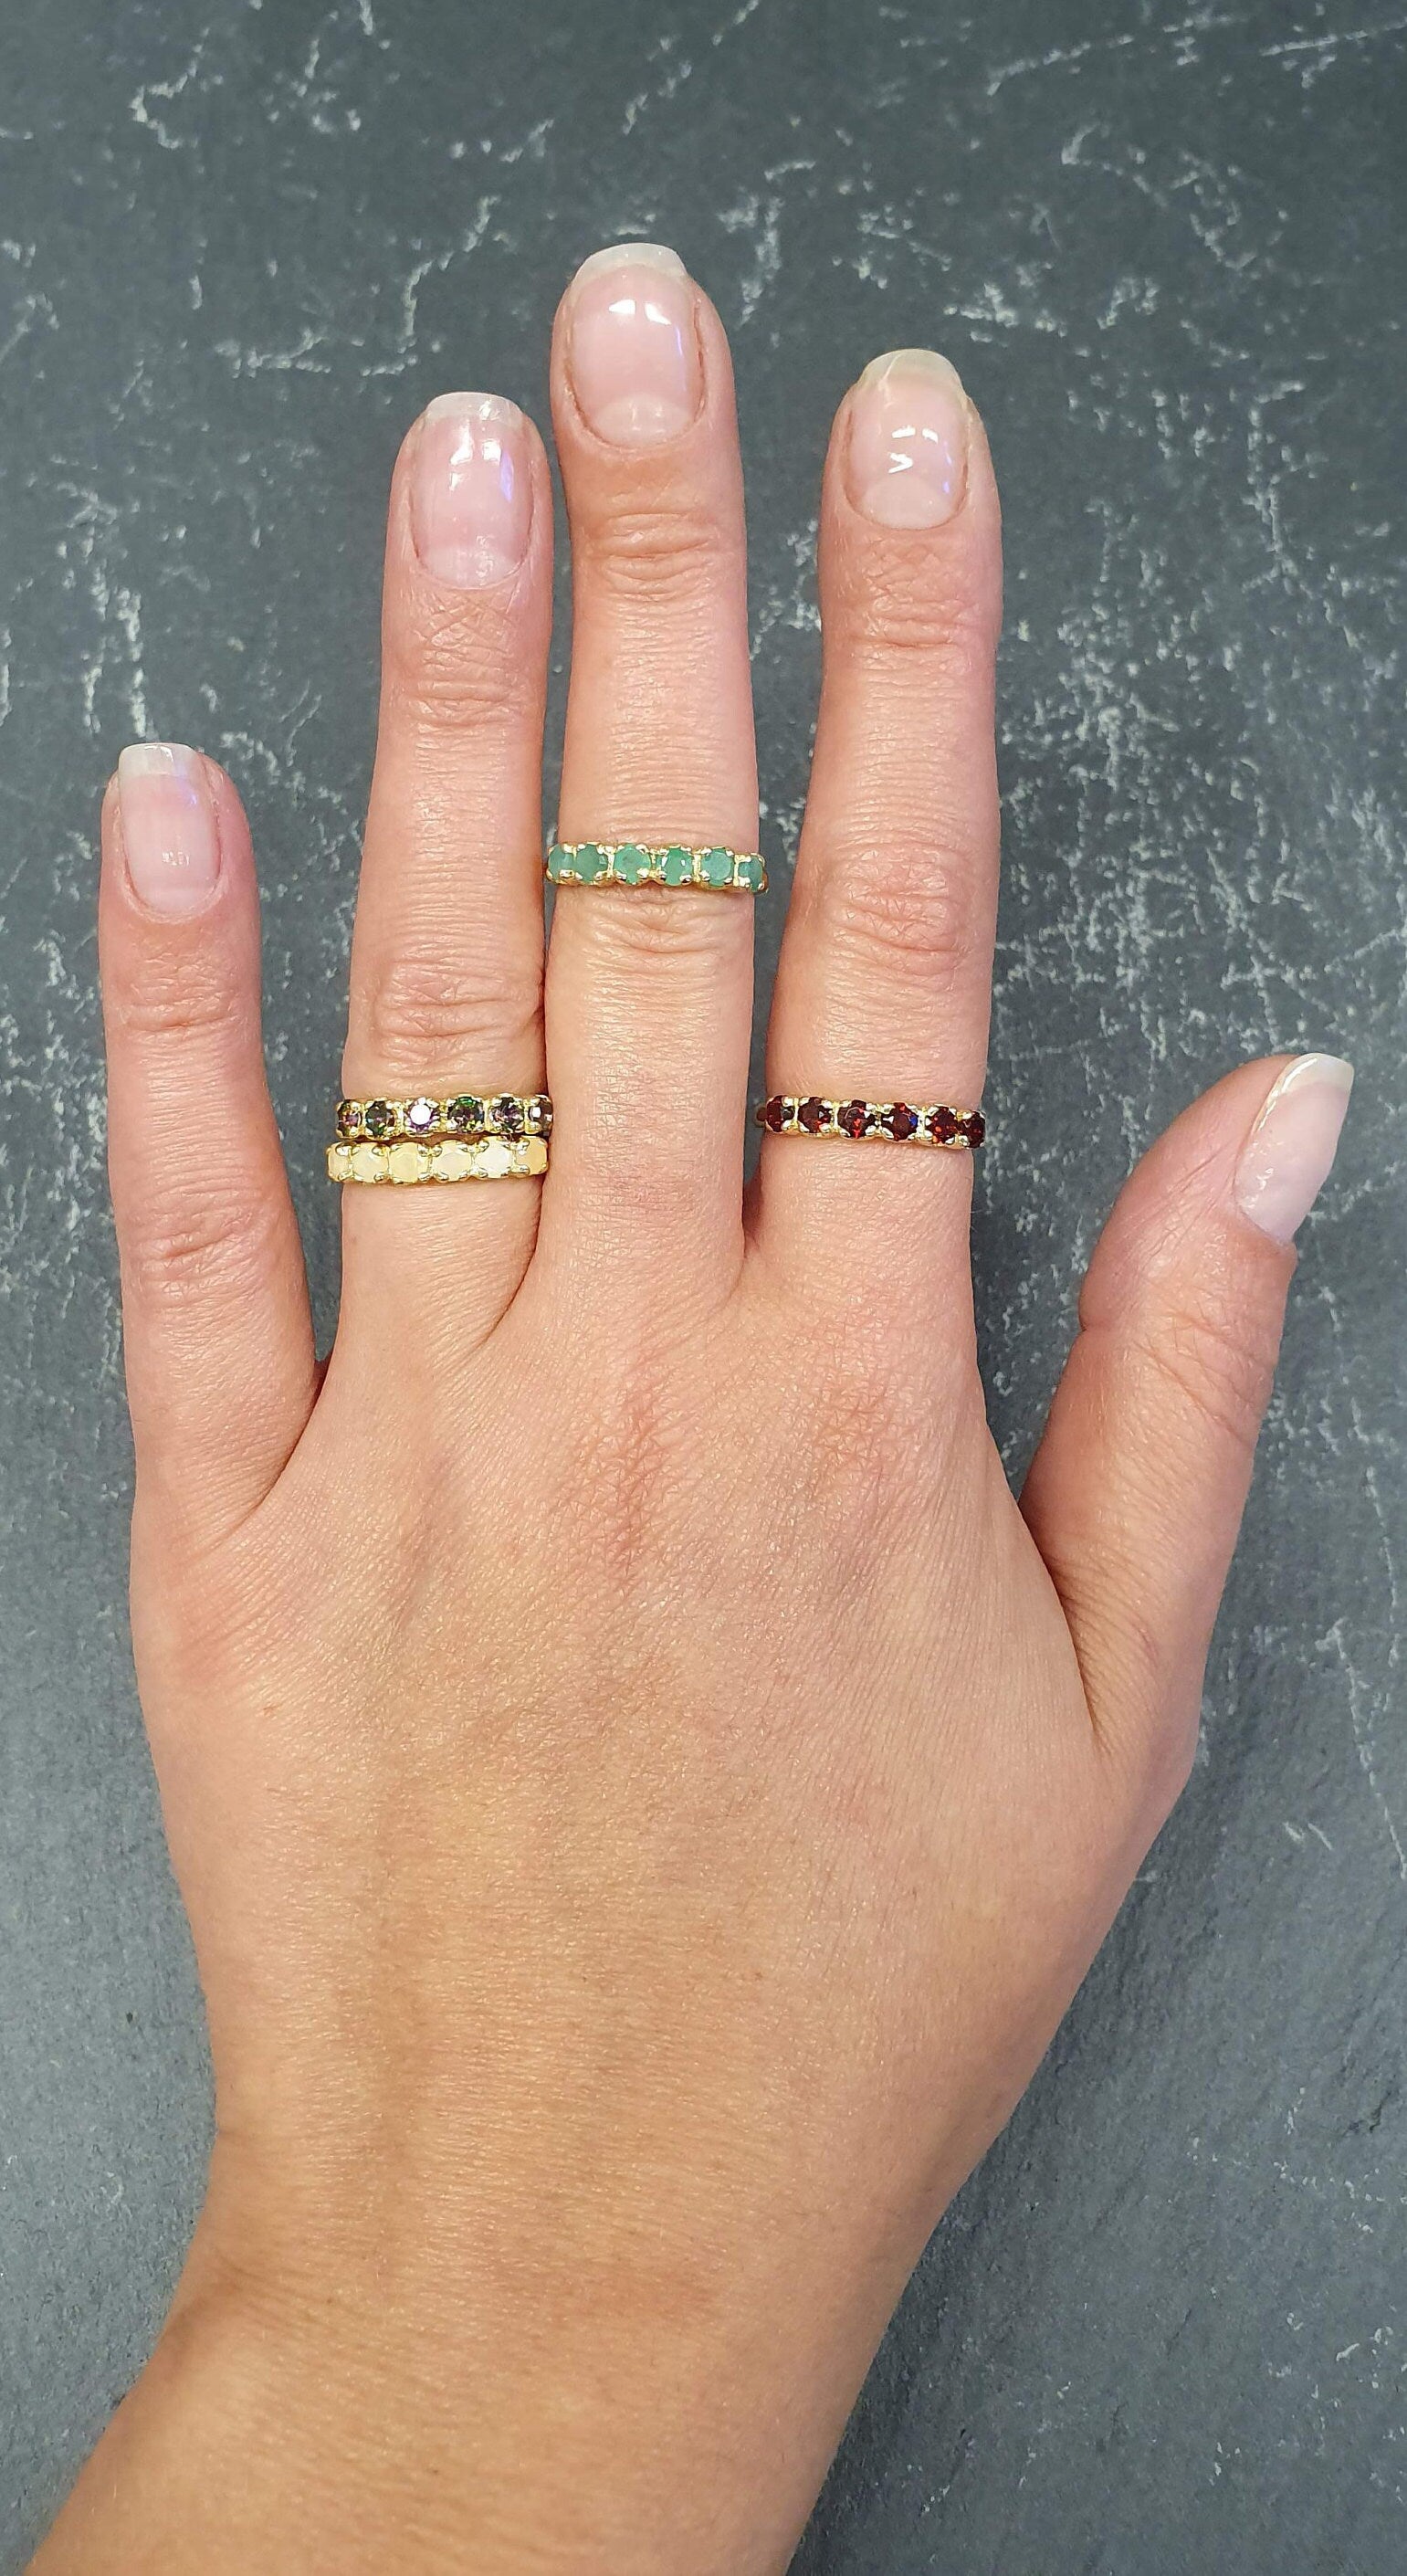 Emerald Gold Ring, Emerald Ring, Natural Emerald, May Birthstone, Gold Eternity Ring, Green Emerald Ring, Gold VintageRing, Stackable Ring